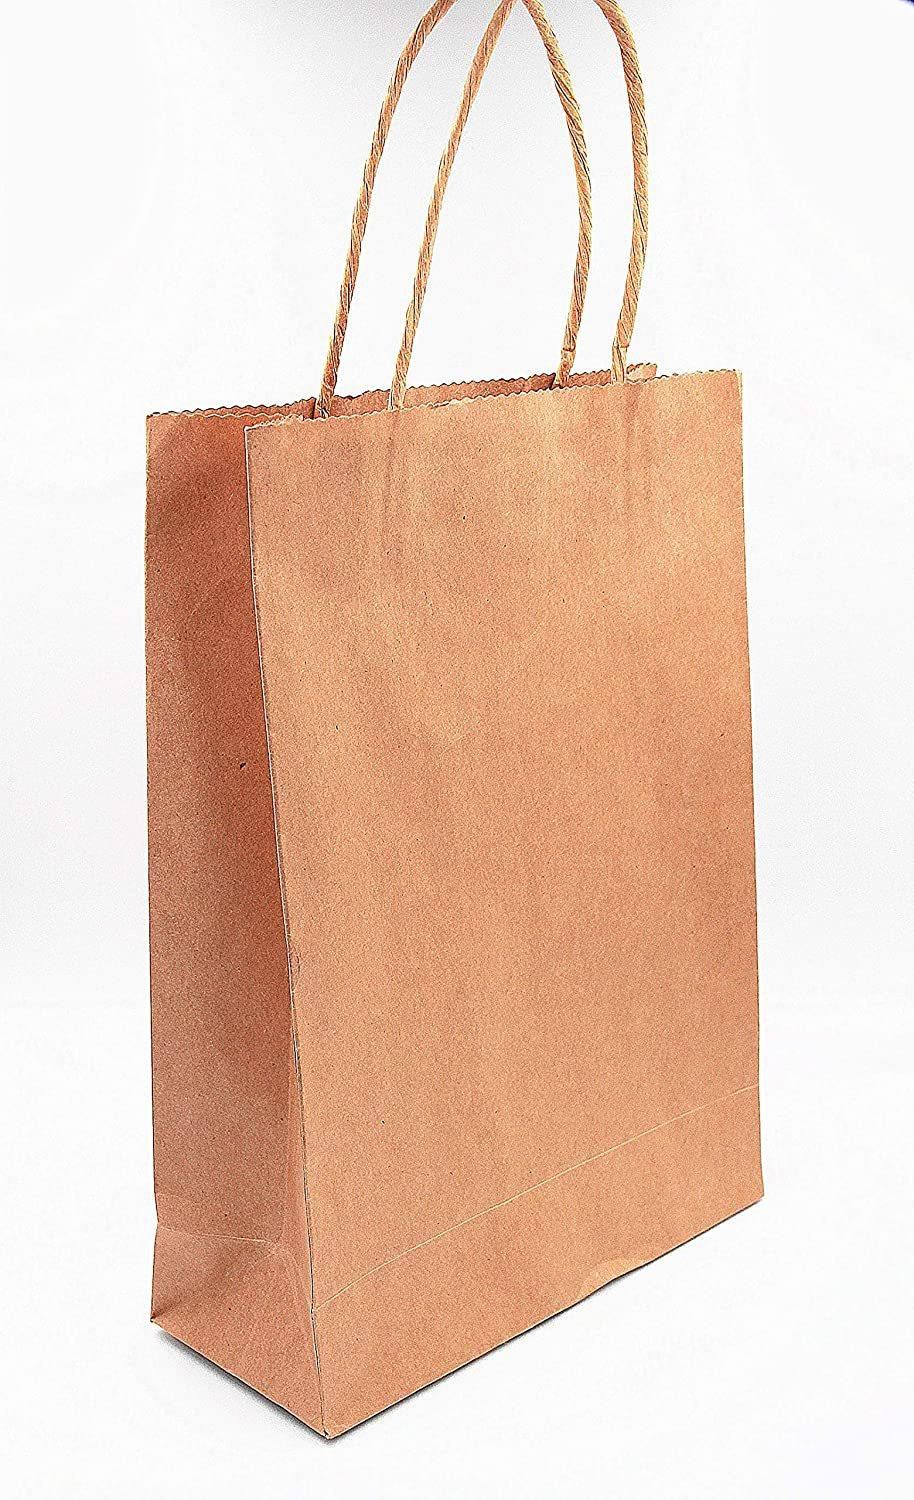 Other A4 Size Kraft Paper Bag, 10 Pcs In One Package